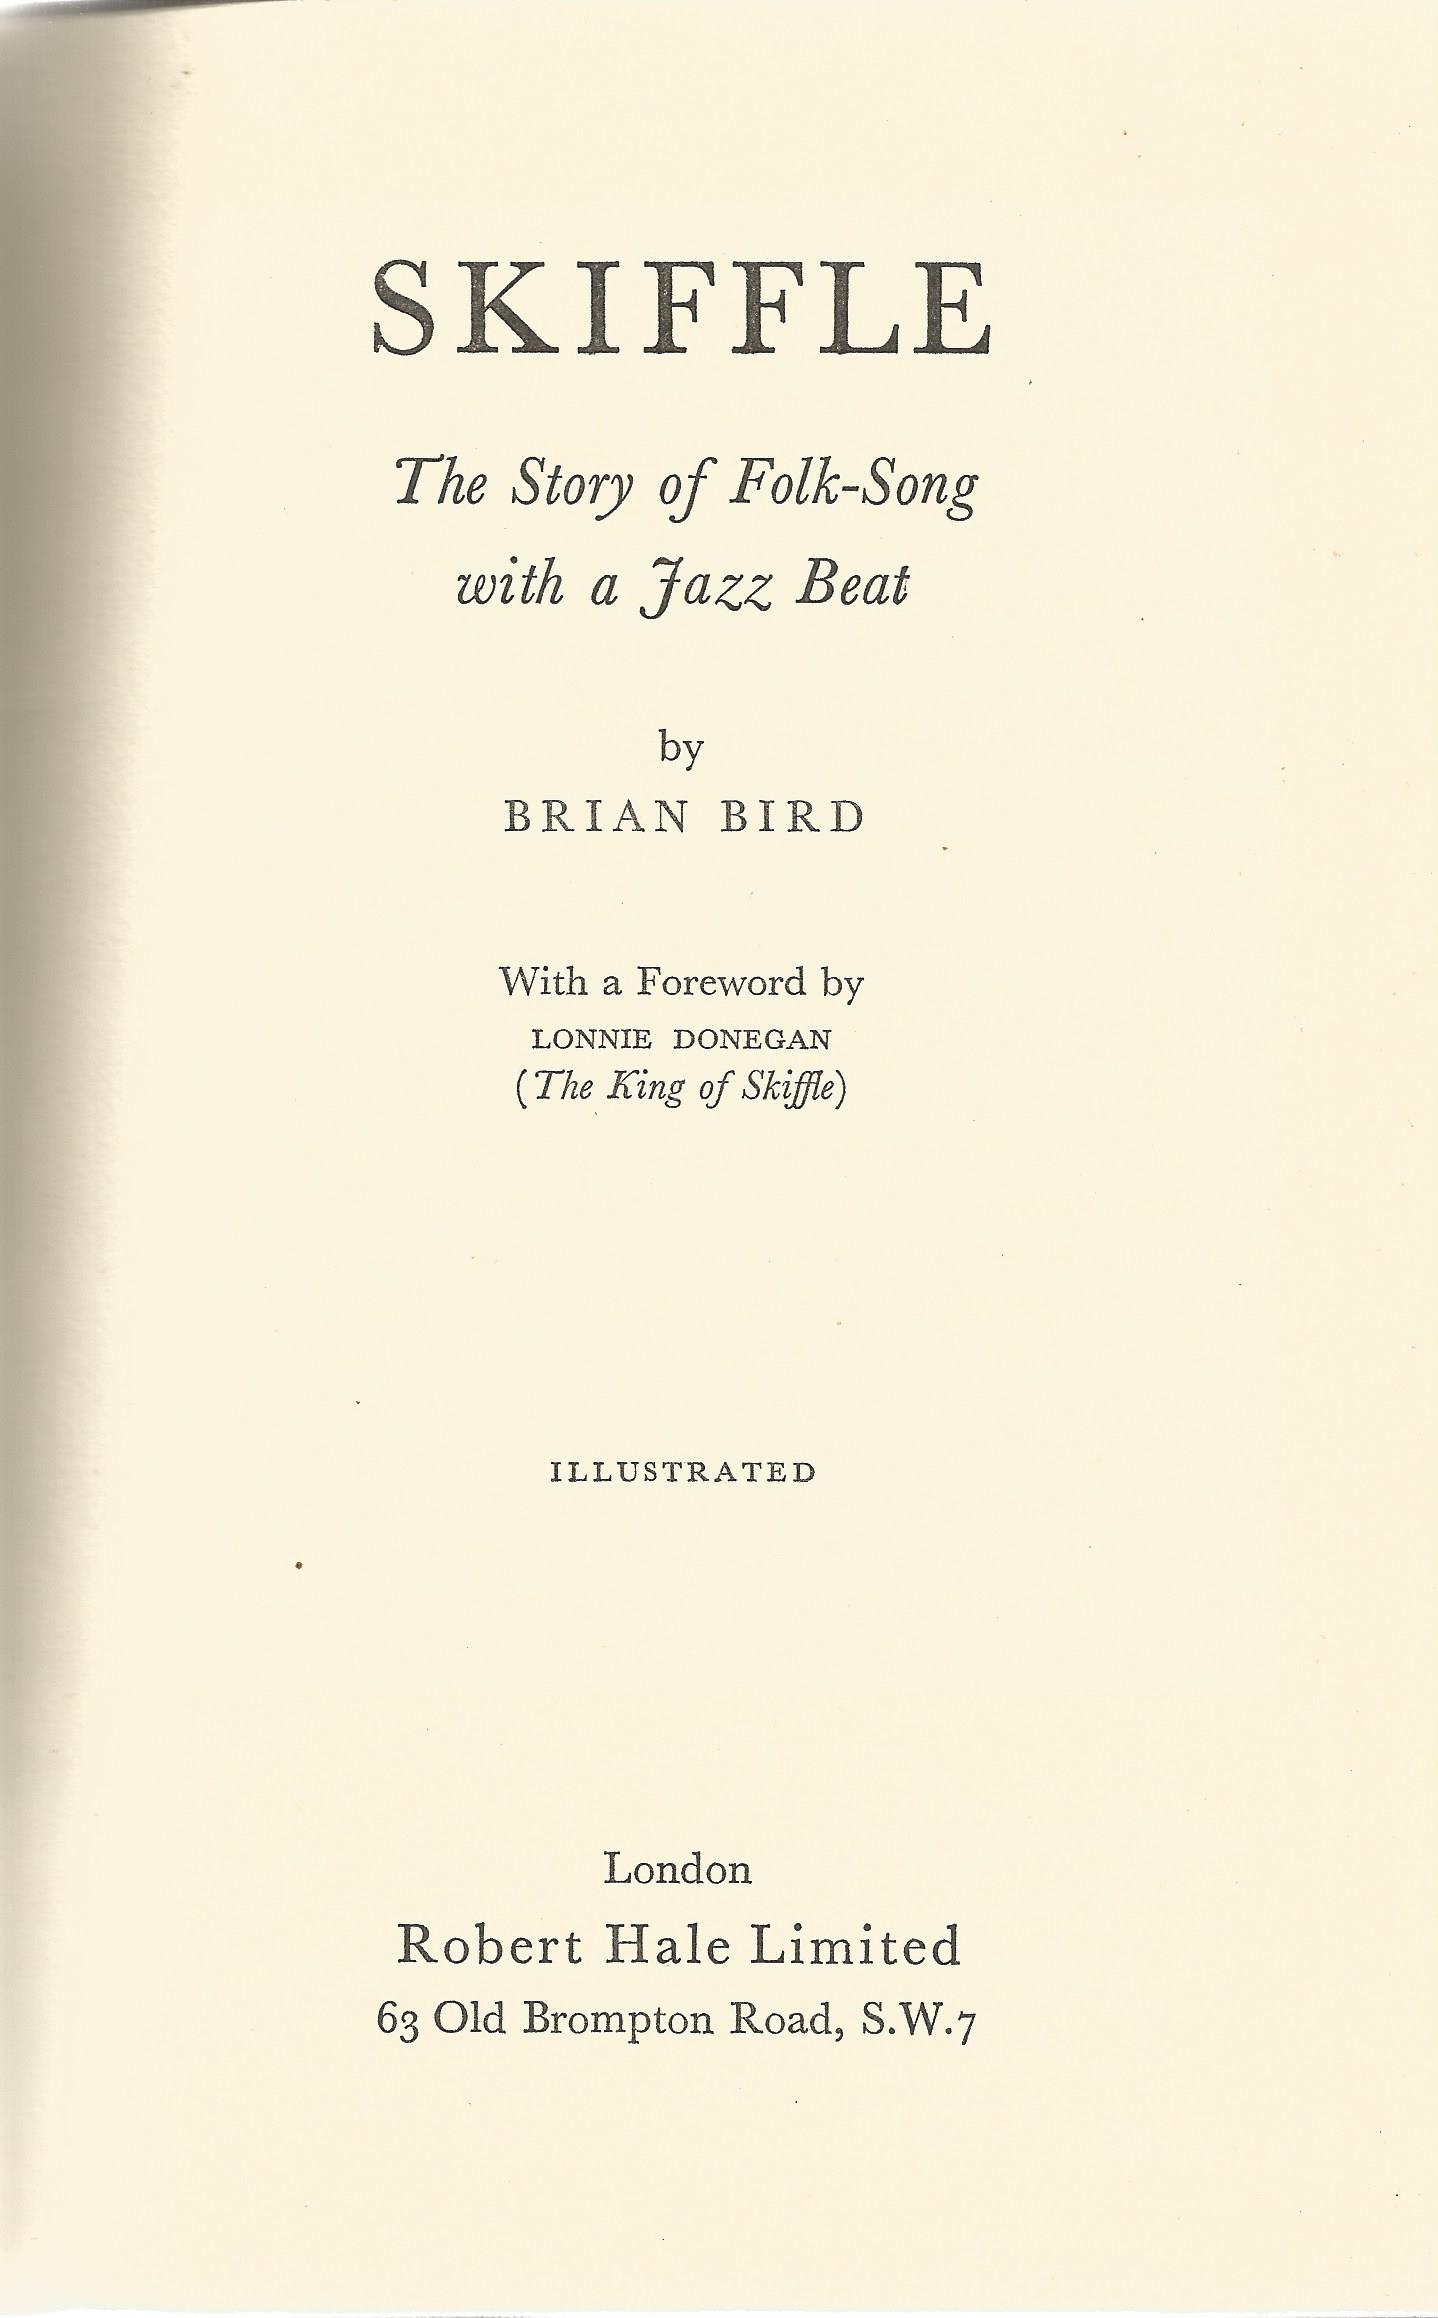 Skiffle The Story of Folk Song with a Jazz Beat by Brian Bird 1958 First Edition Hardback Book - Image 2 of 3